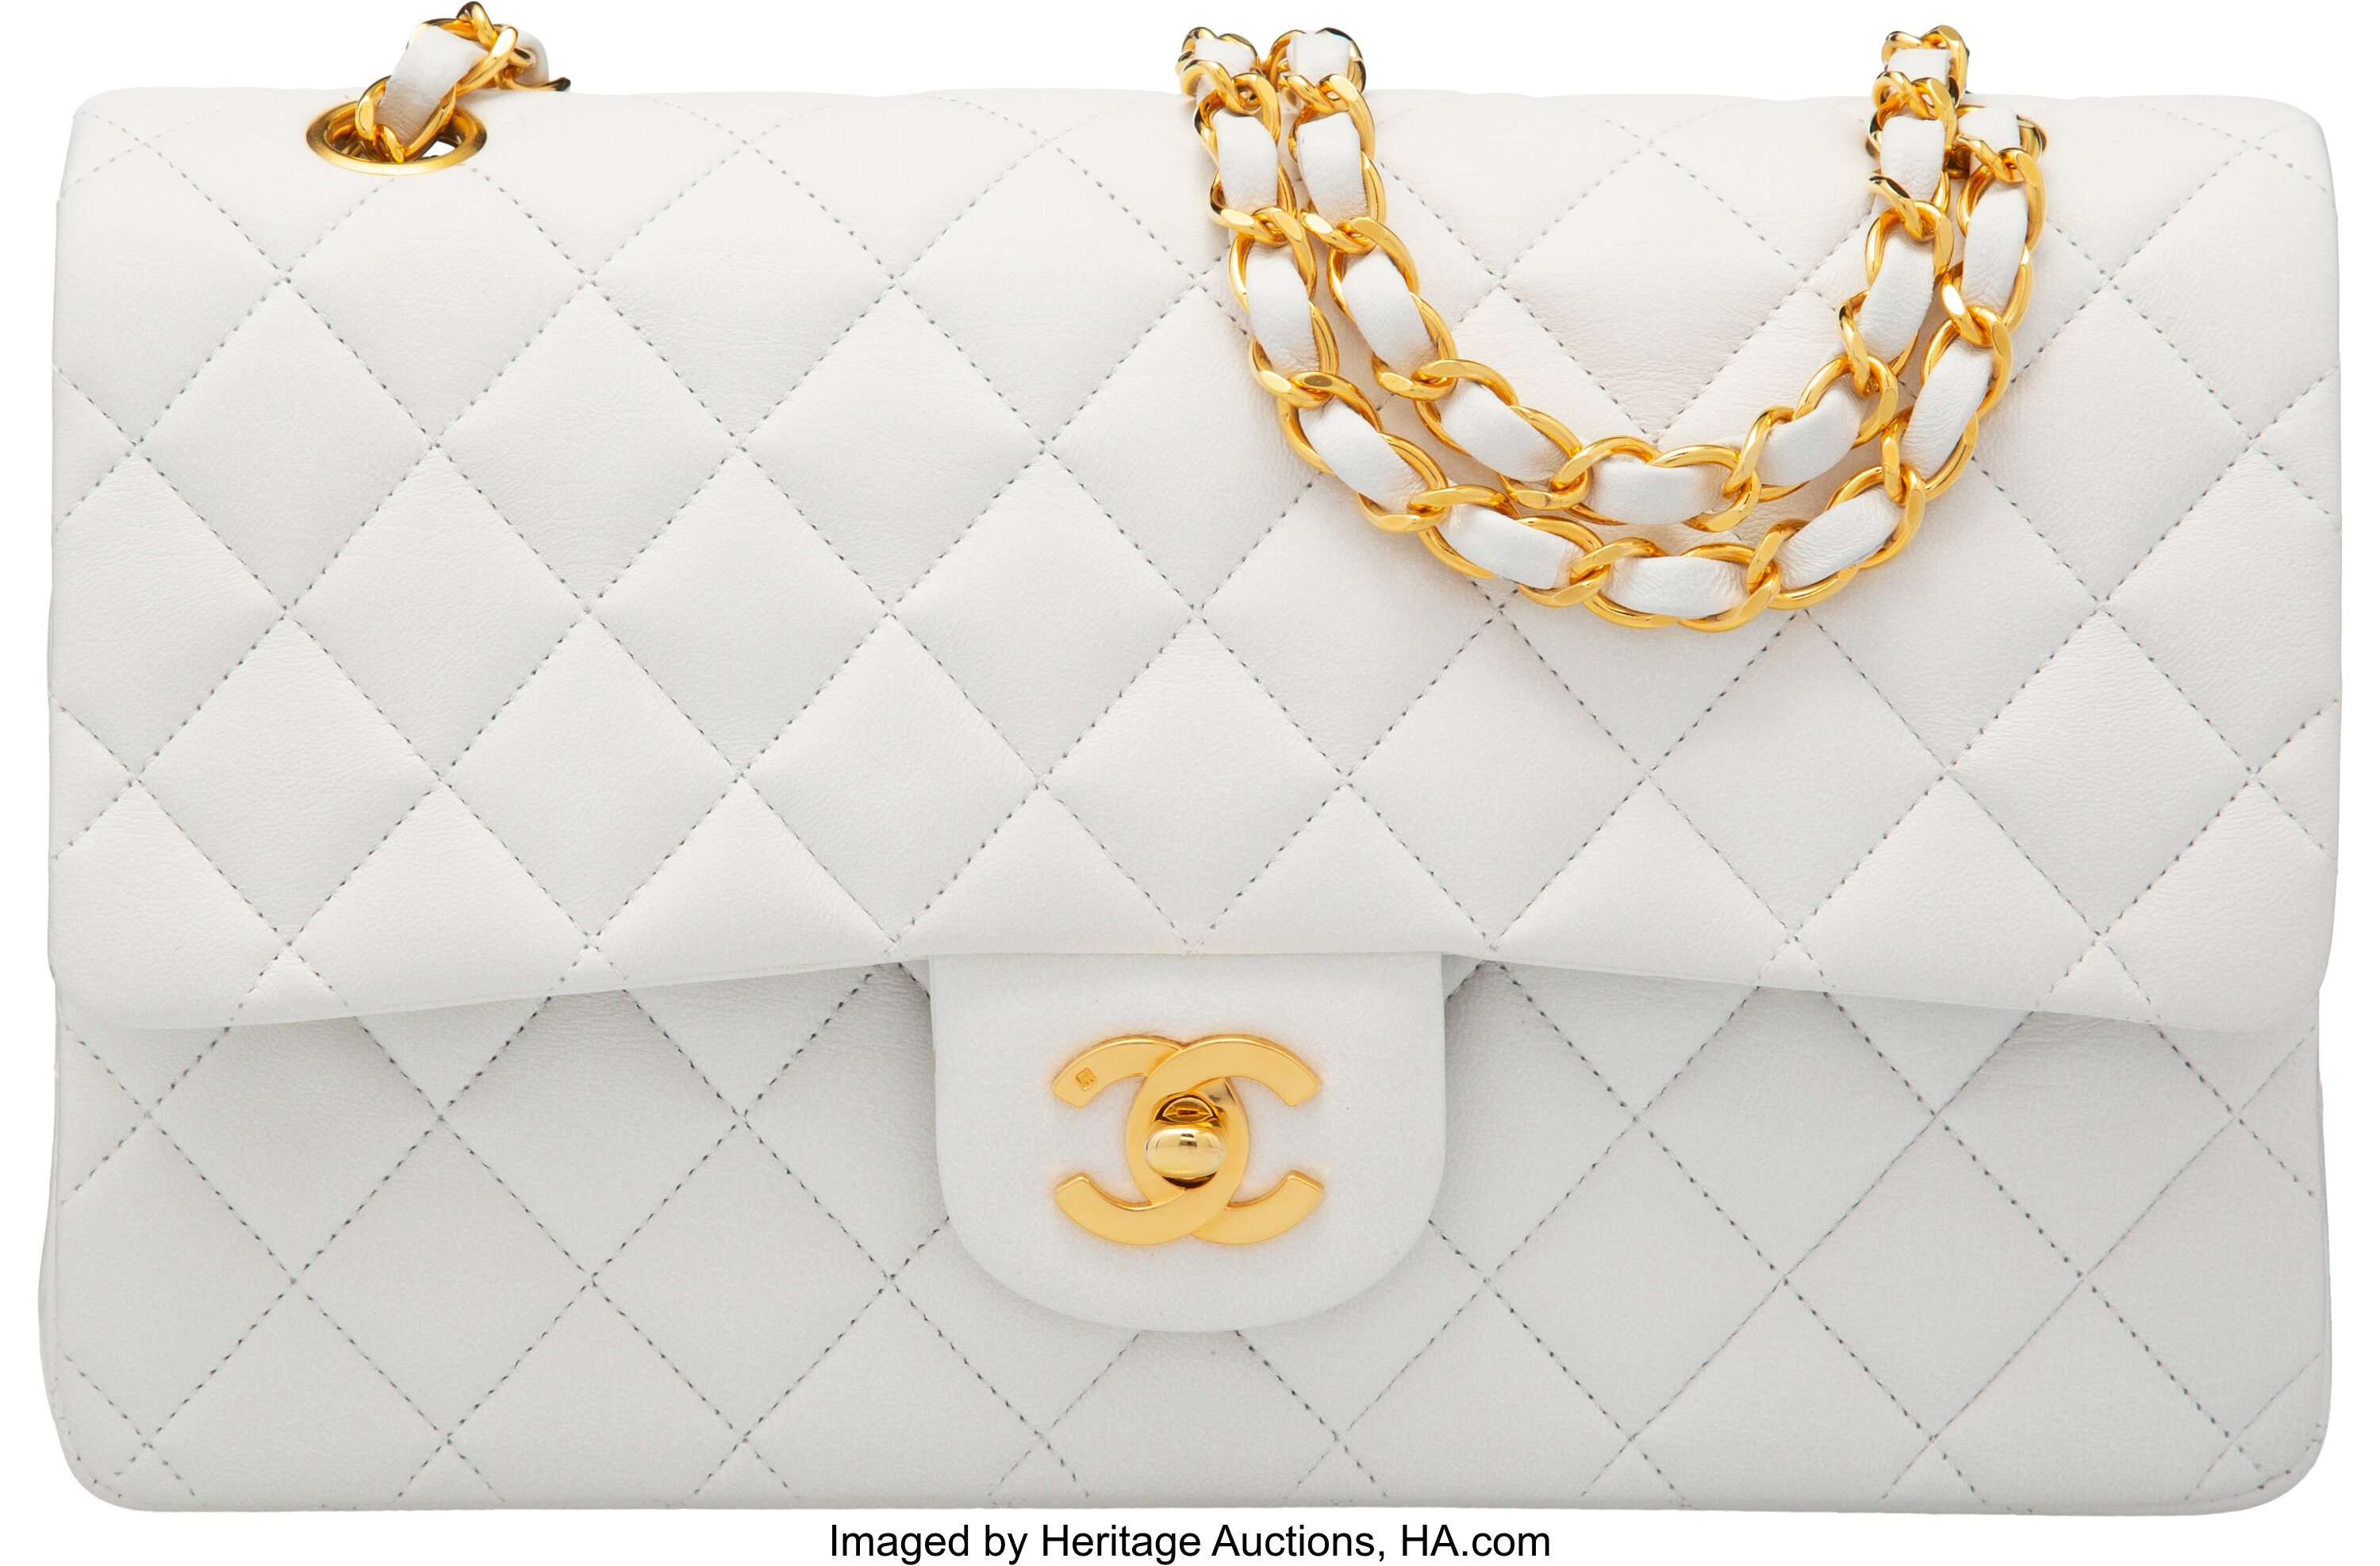 Chanel Vintage White Lambskin Leather Medium Double Flap Bag with | Lot  #58049 | Heritage Auctions